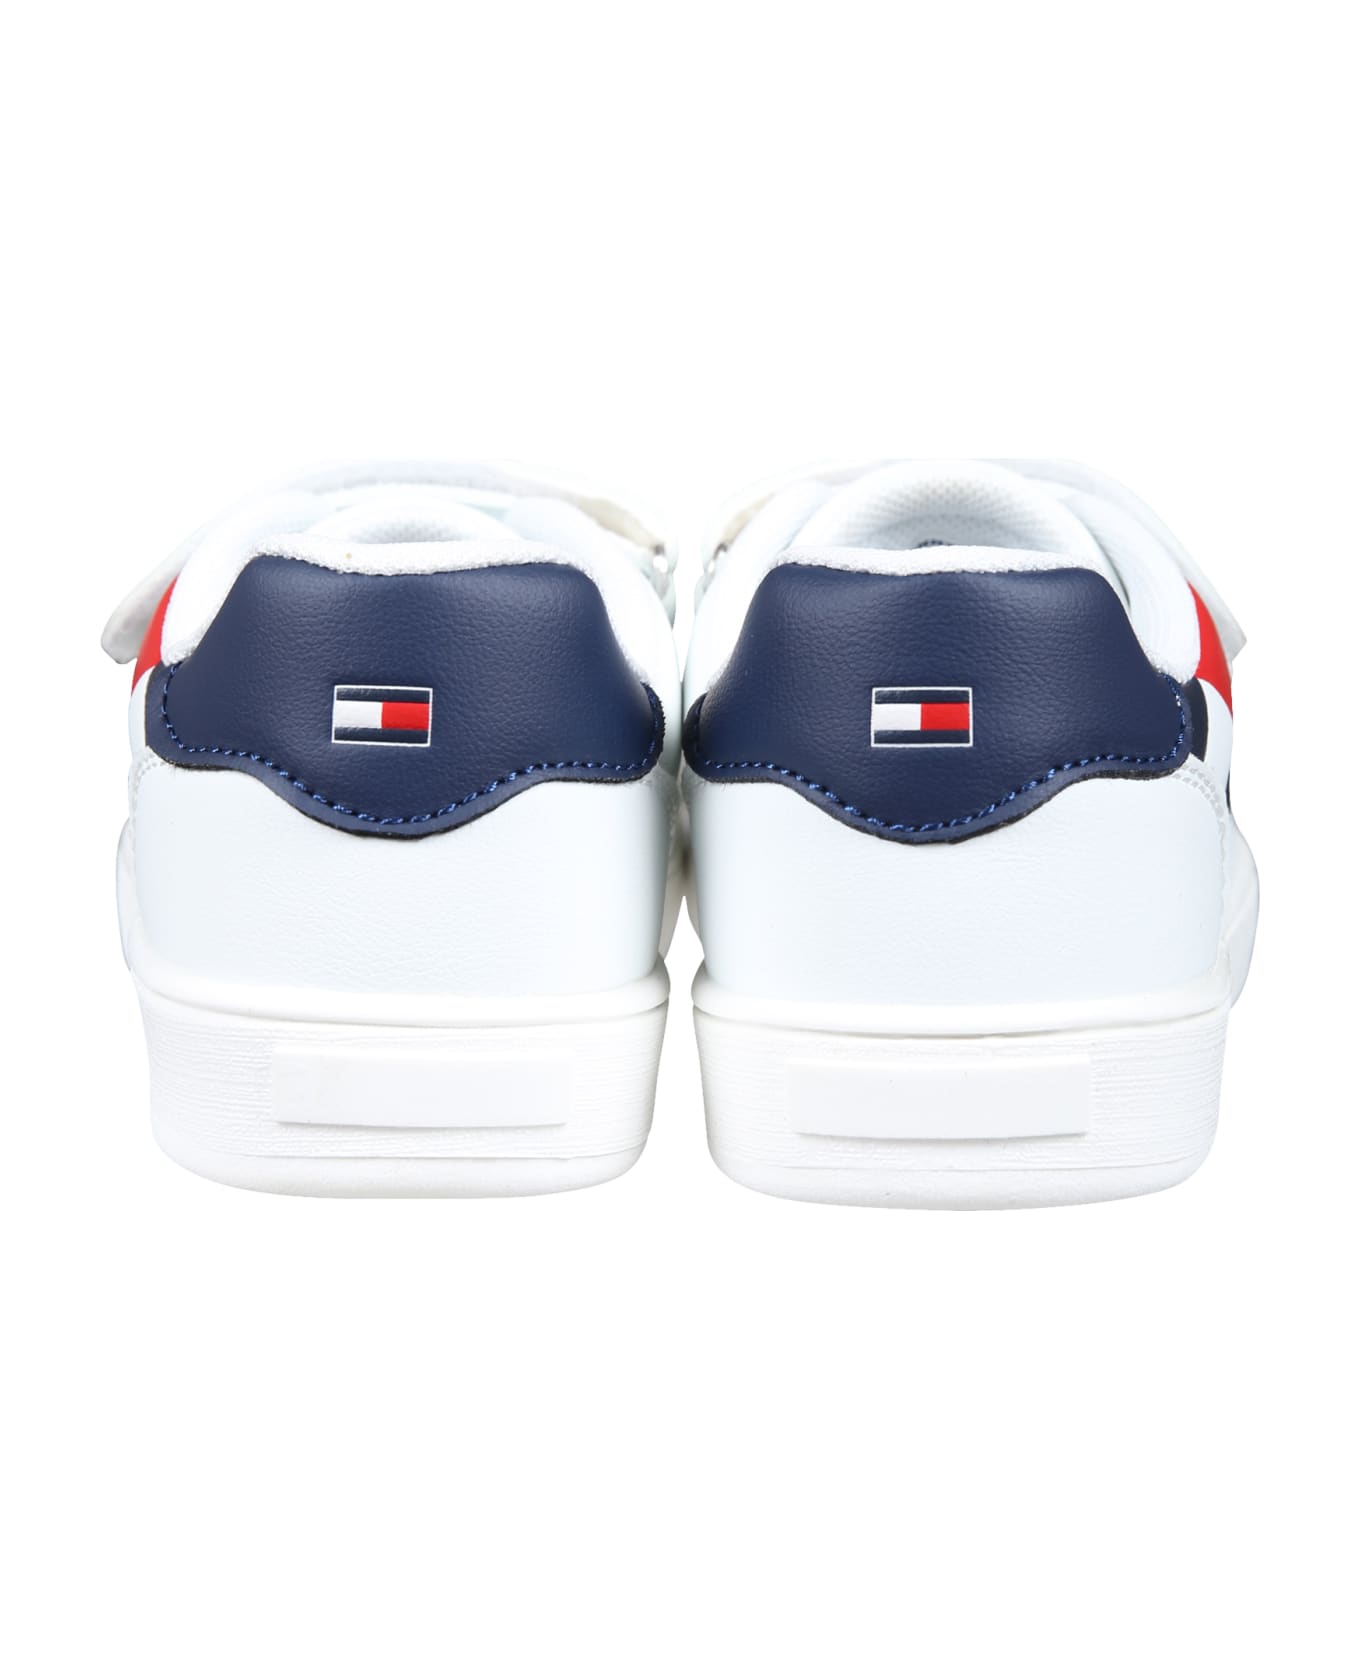 Tommy Hilfiger White Sneakers For Kids With Flag And Logo - White シューズ